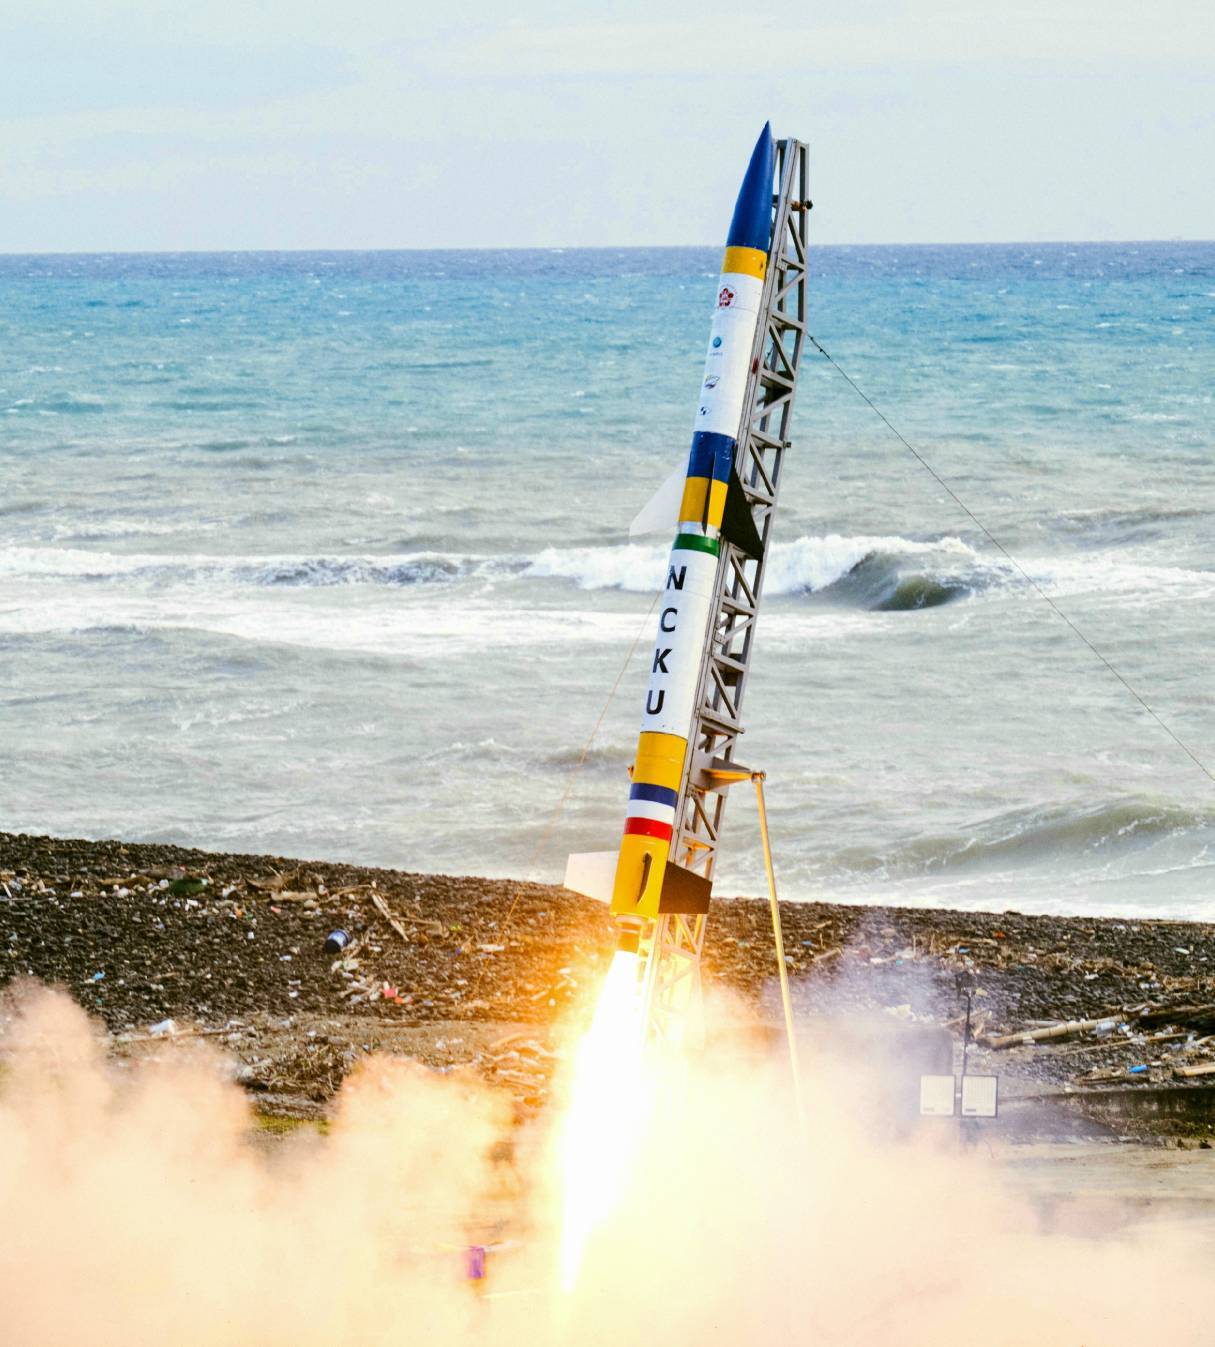 NCKU's Two-stage Hybrid Rocket was Successfully Launched at the Syuhai Scientific Research Rocket Launch Site